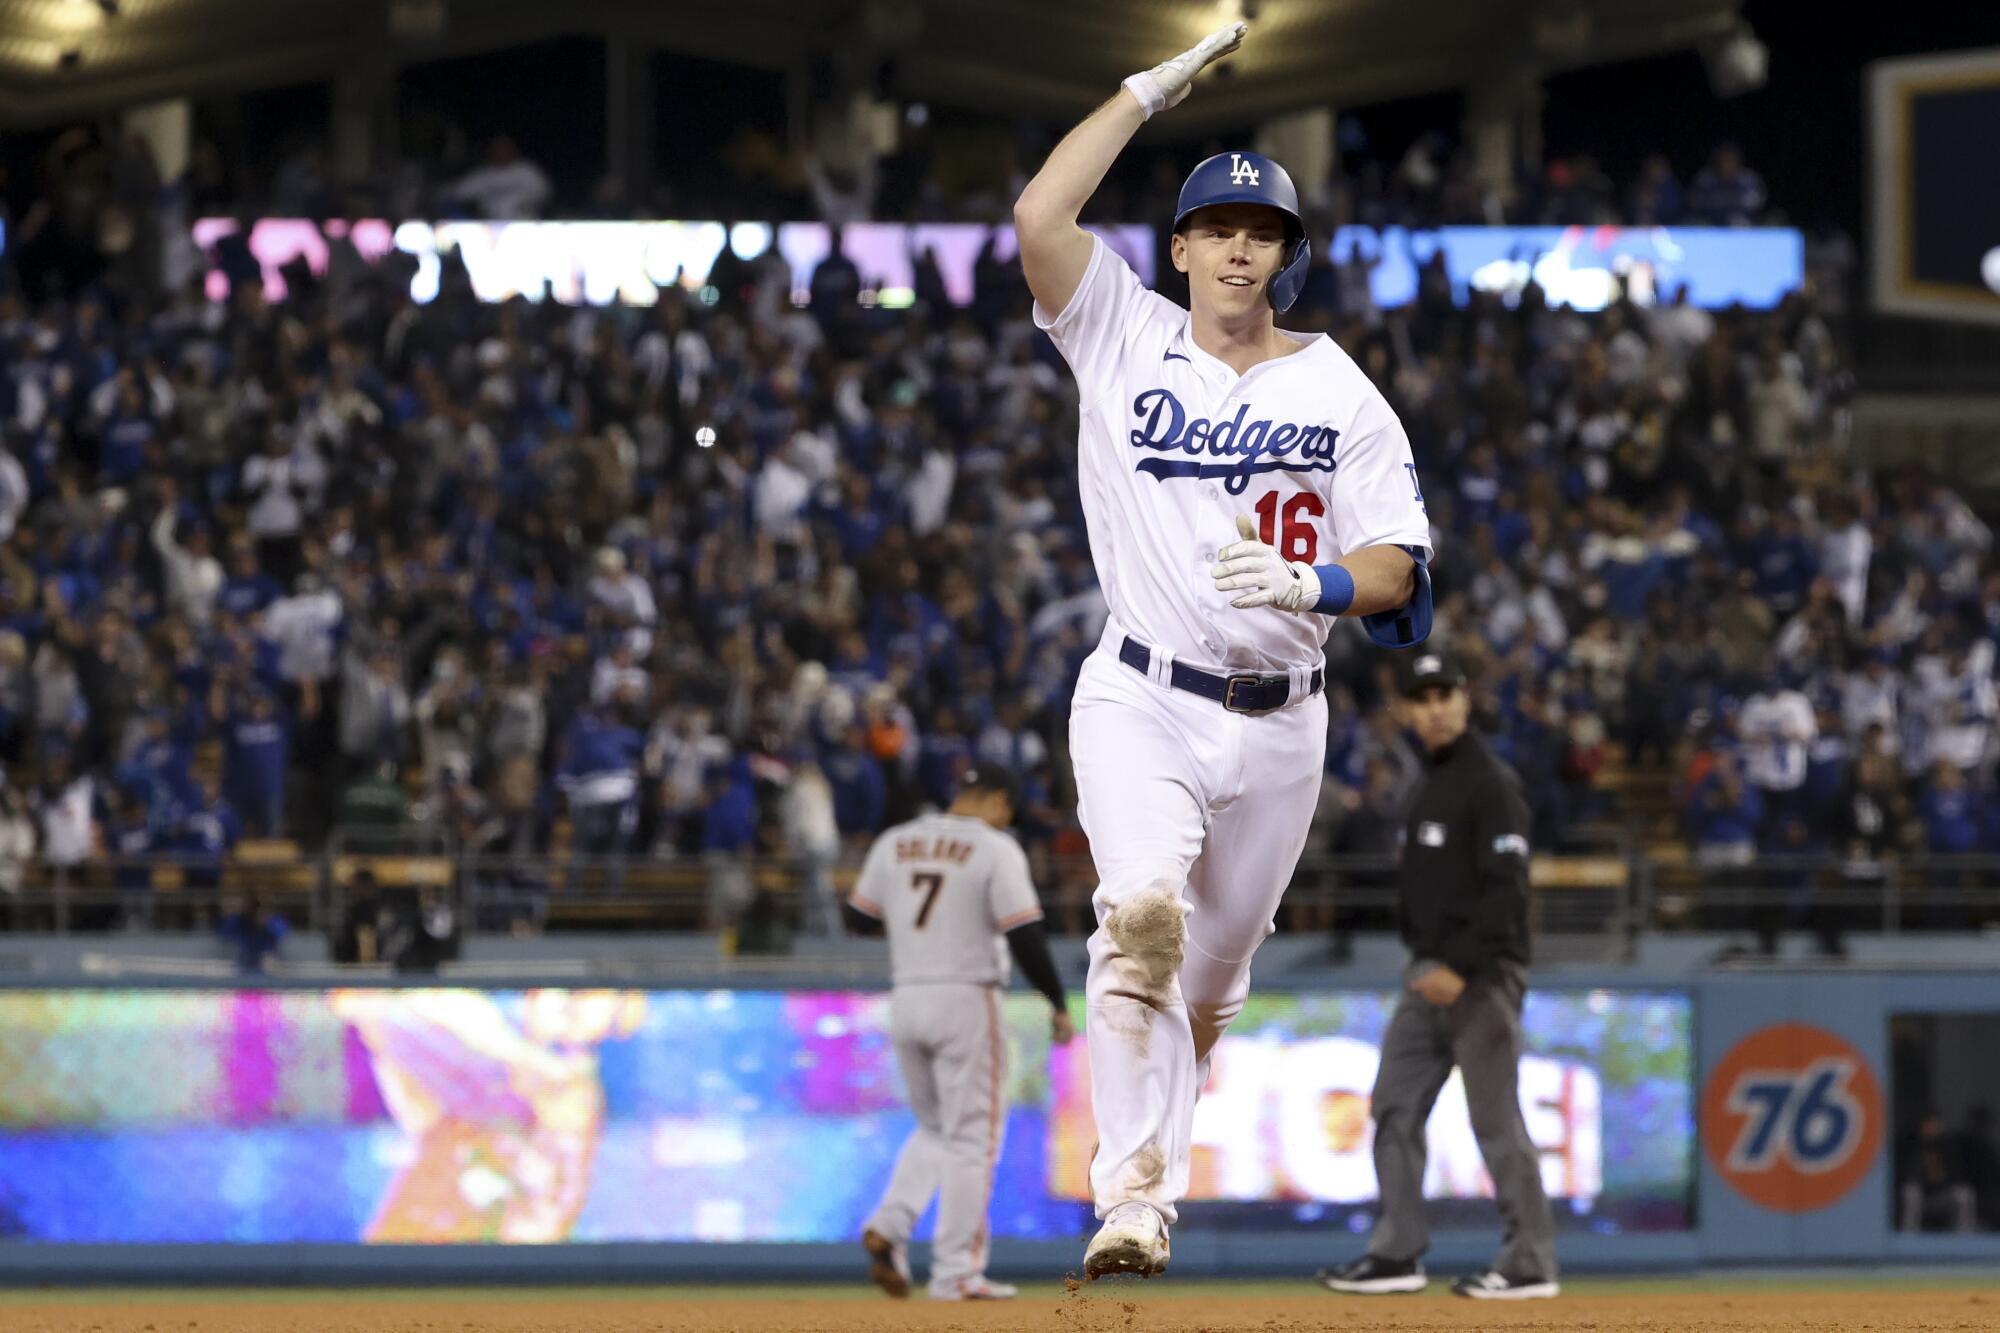 Dodgers catcher Will Smith rounds the bases after hitting a two-run home run during the eighth inning of Game 4.